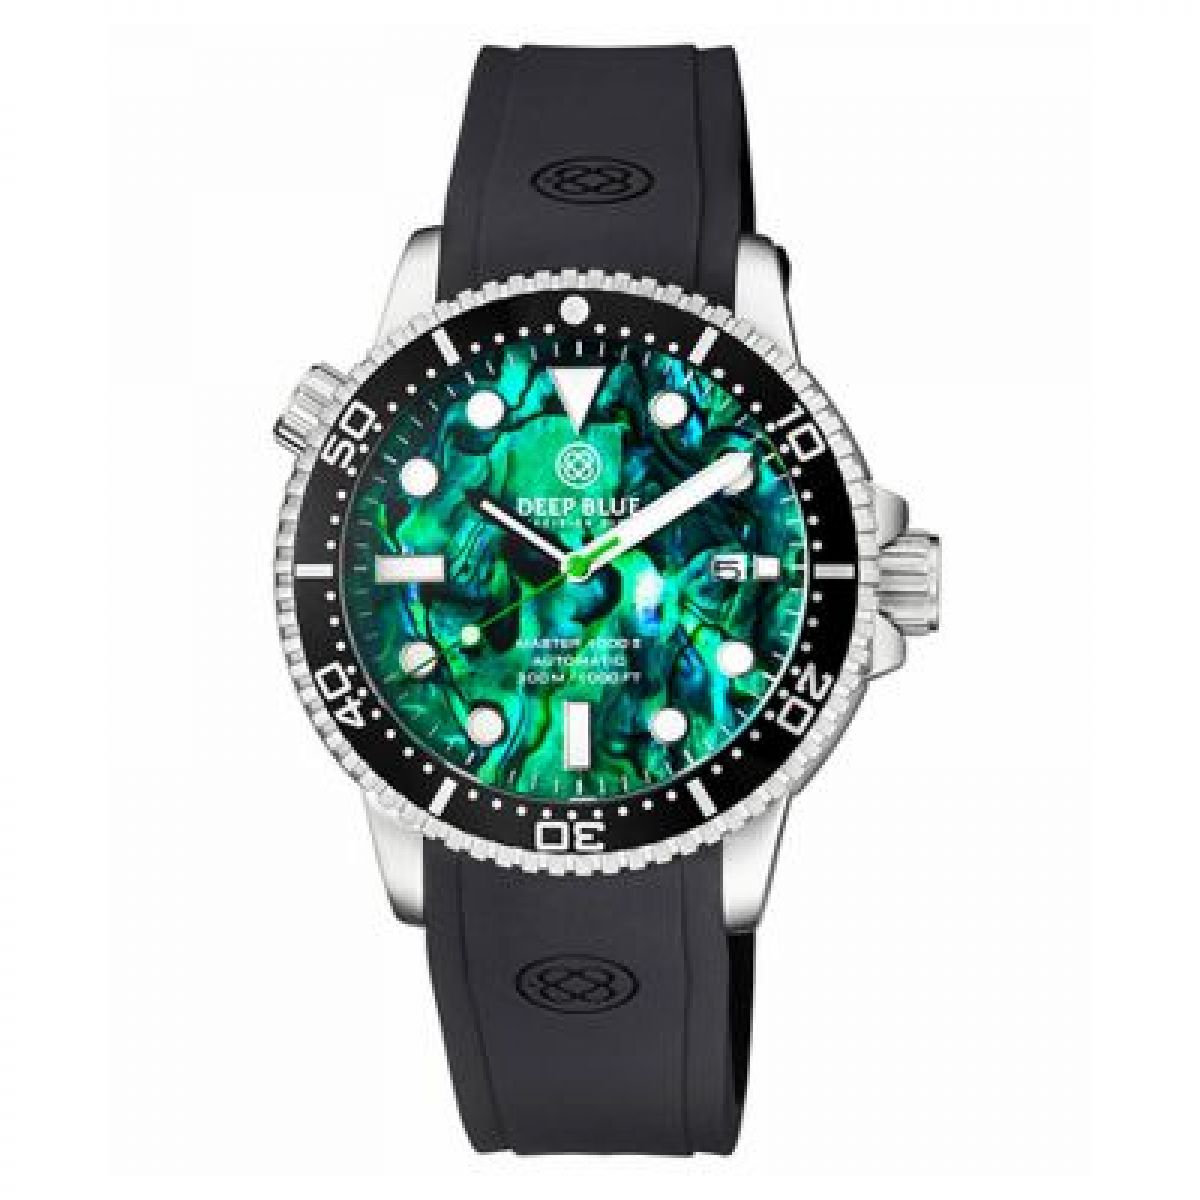 MASTER 1000 II 44MM AUTOMATIC DIVER BLACK CERAMIC BEZEL -GREEN ABALONE DIAL